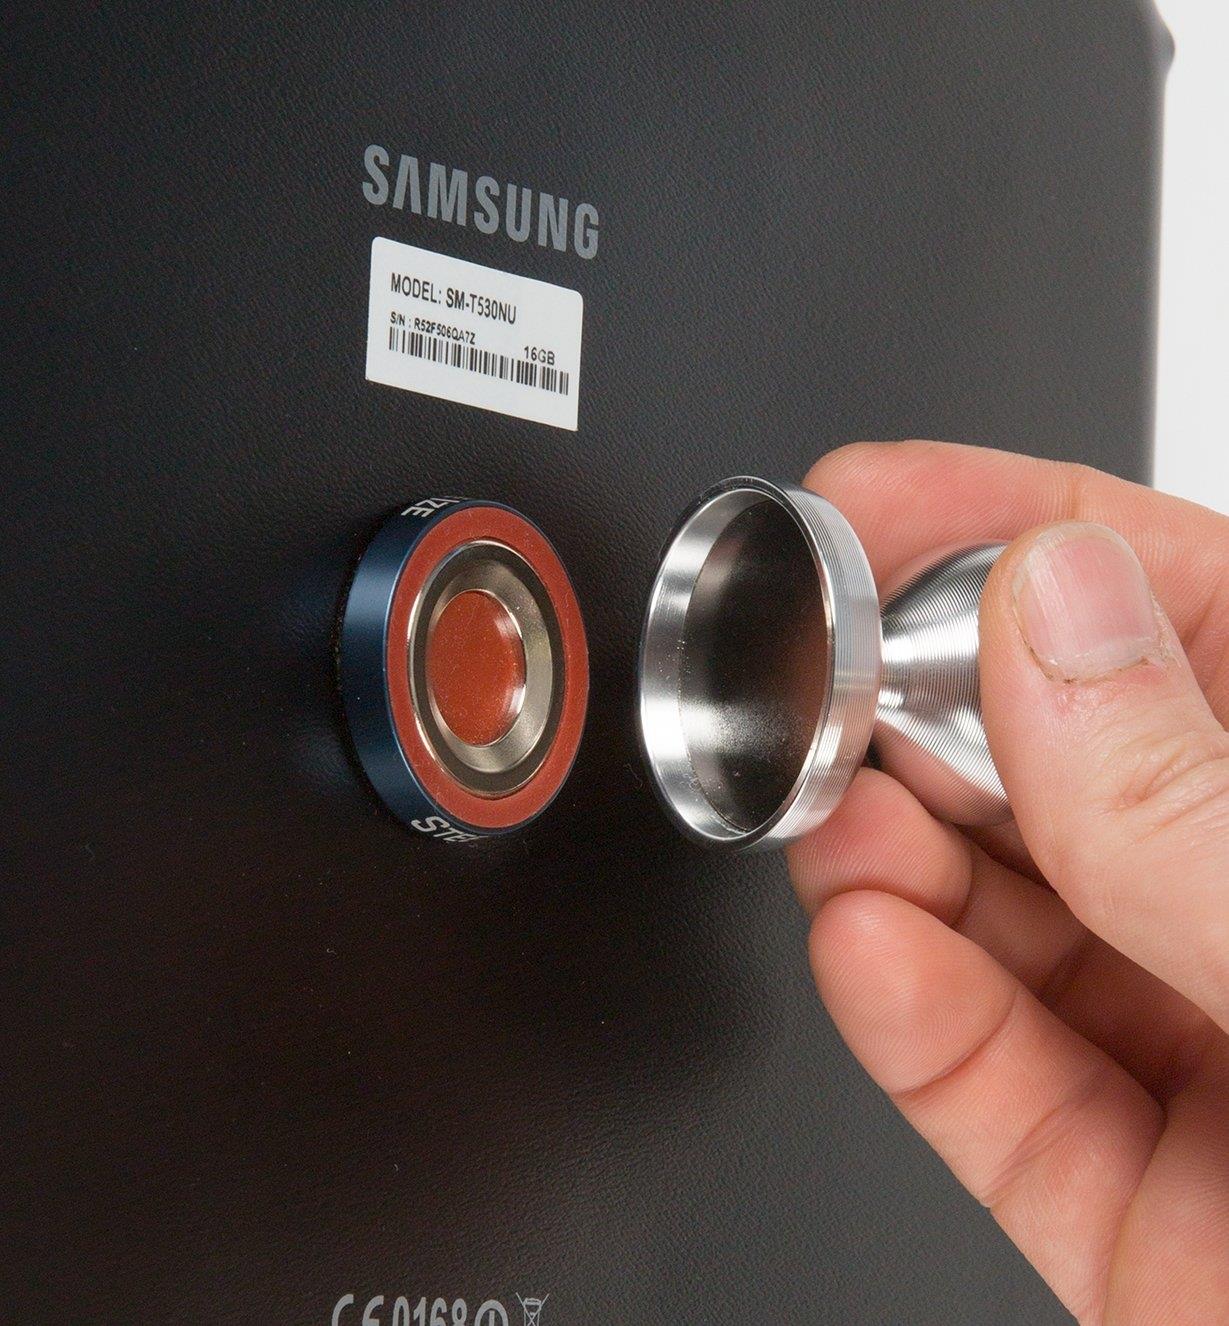 Attaching the HobKnob to a magnetic disc on the back of a tablet